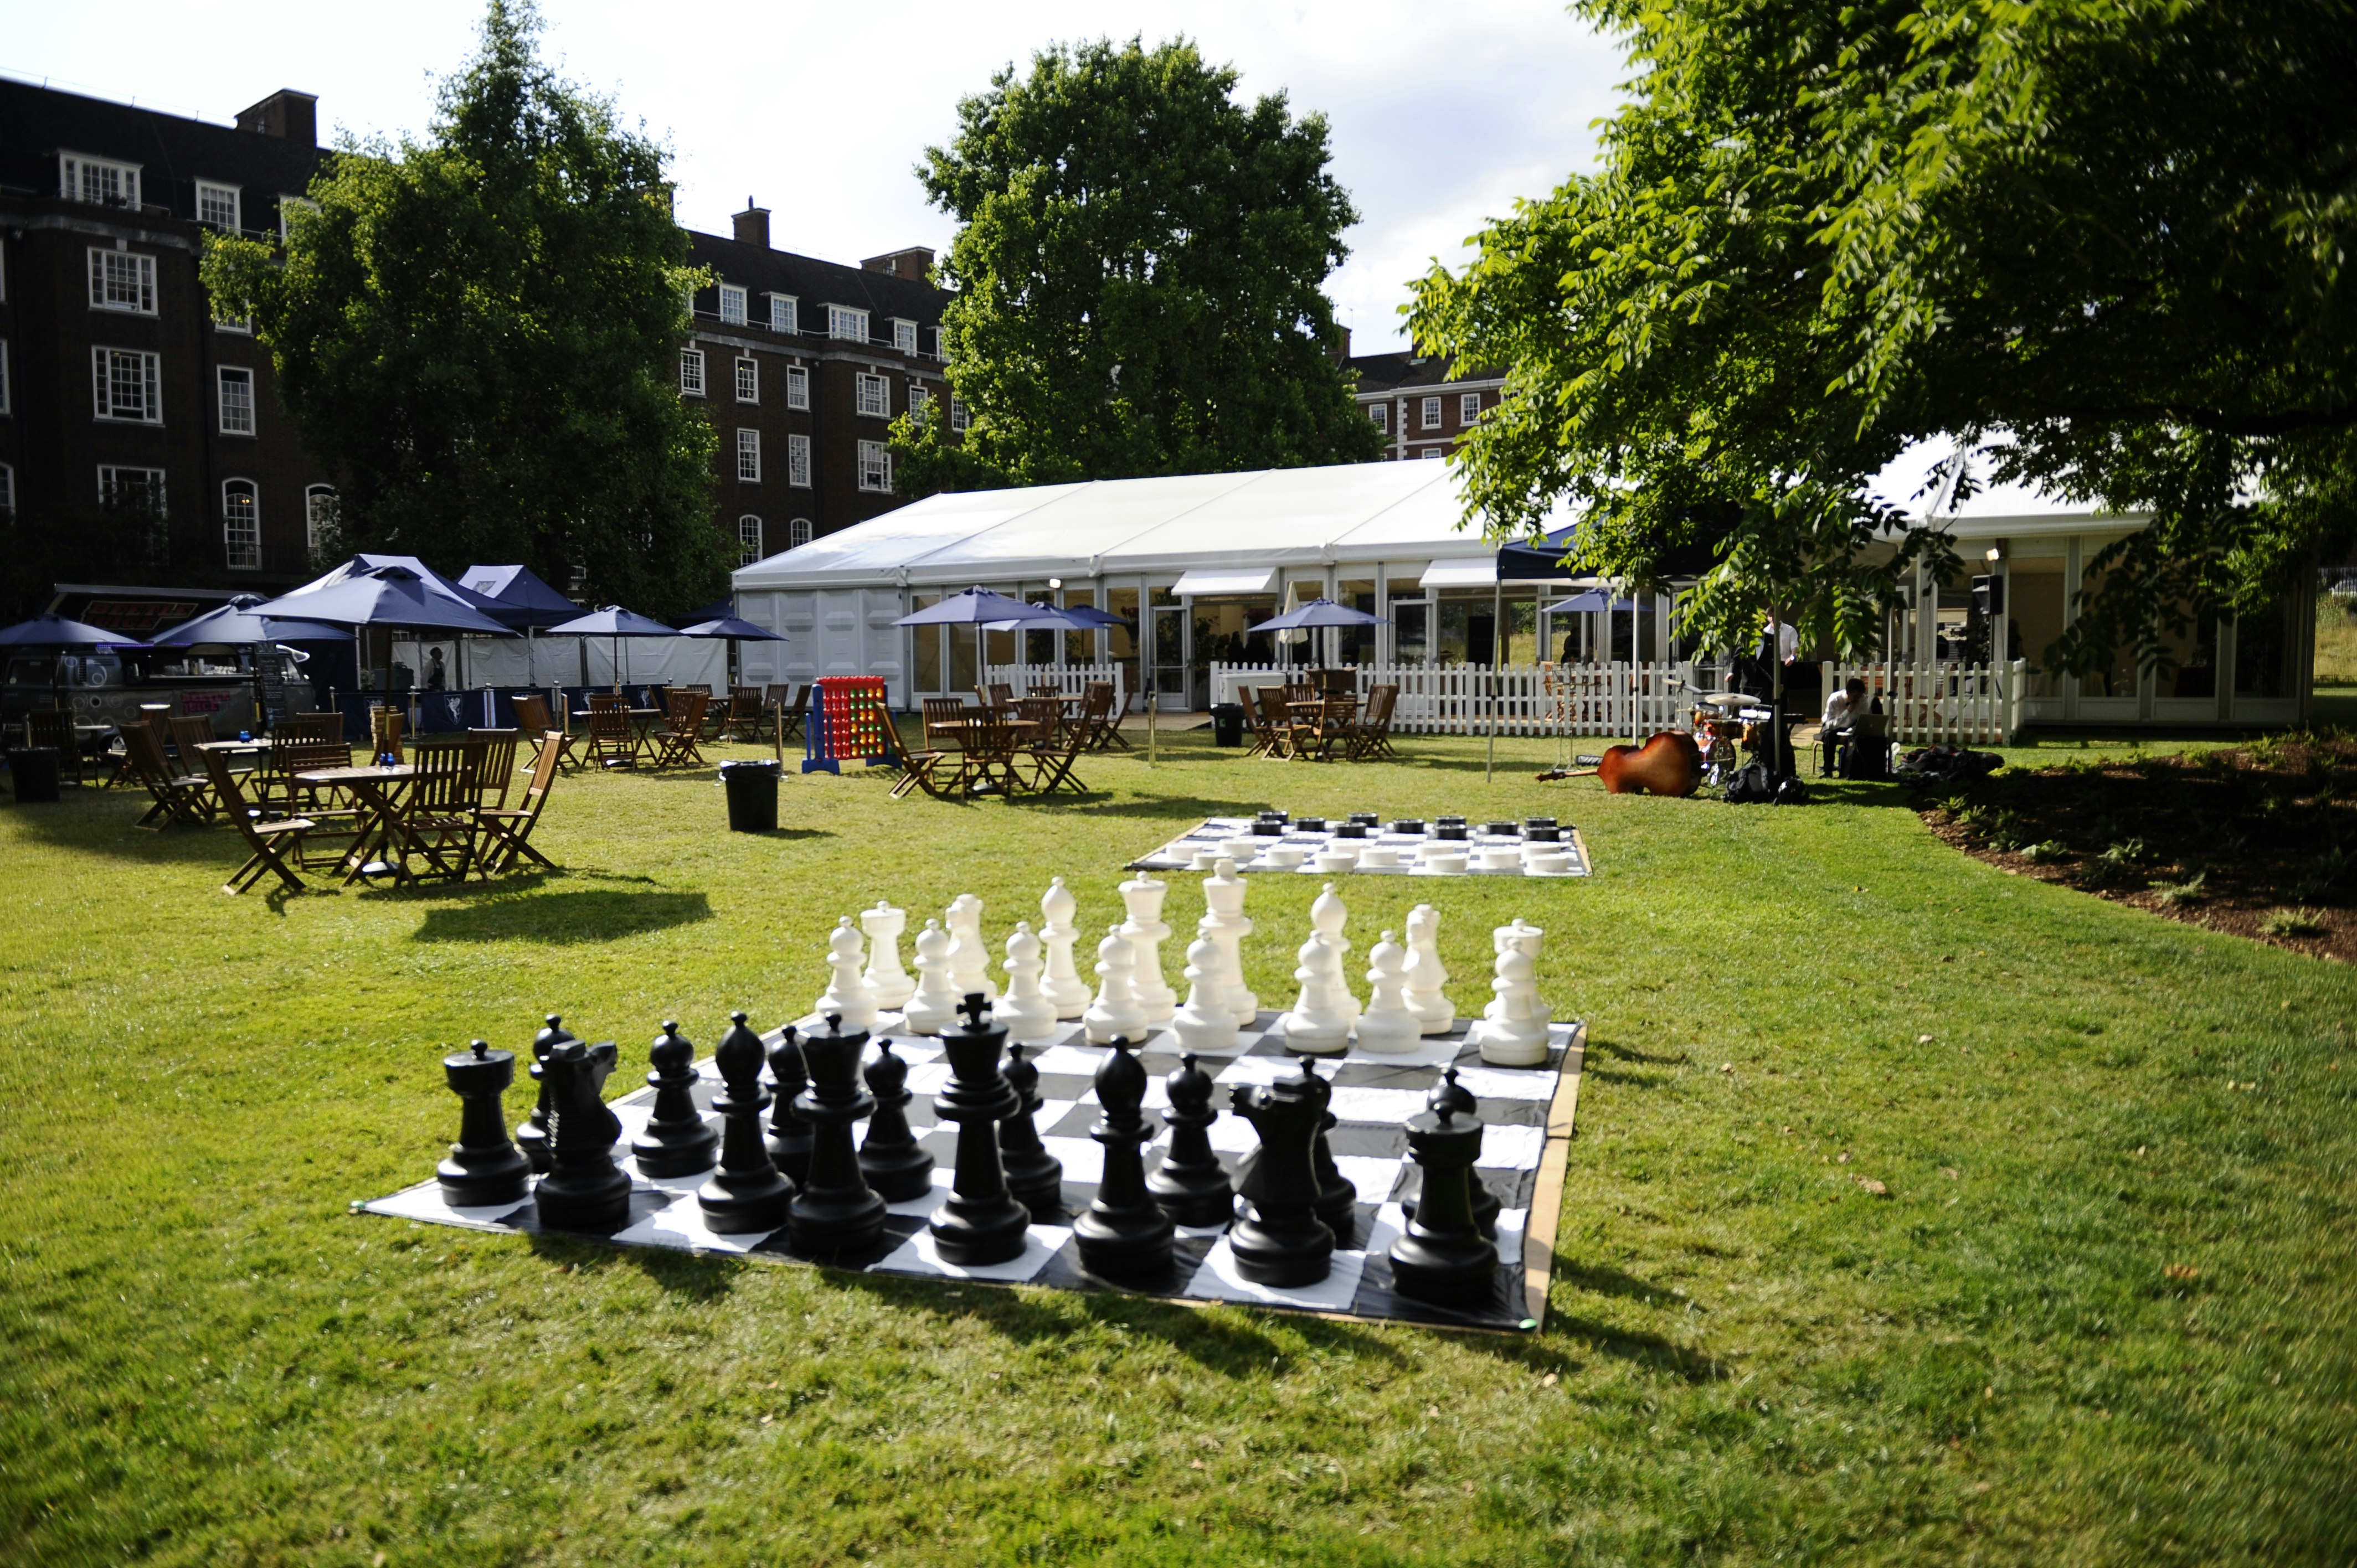 Outdoor Party Venues in London - The Honourable Society of the Inner Temple